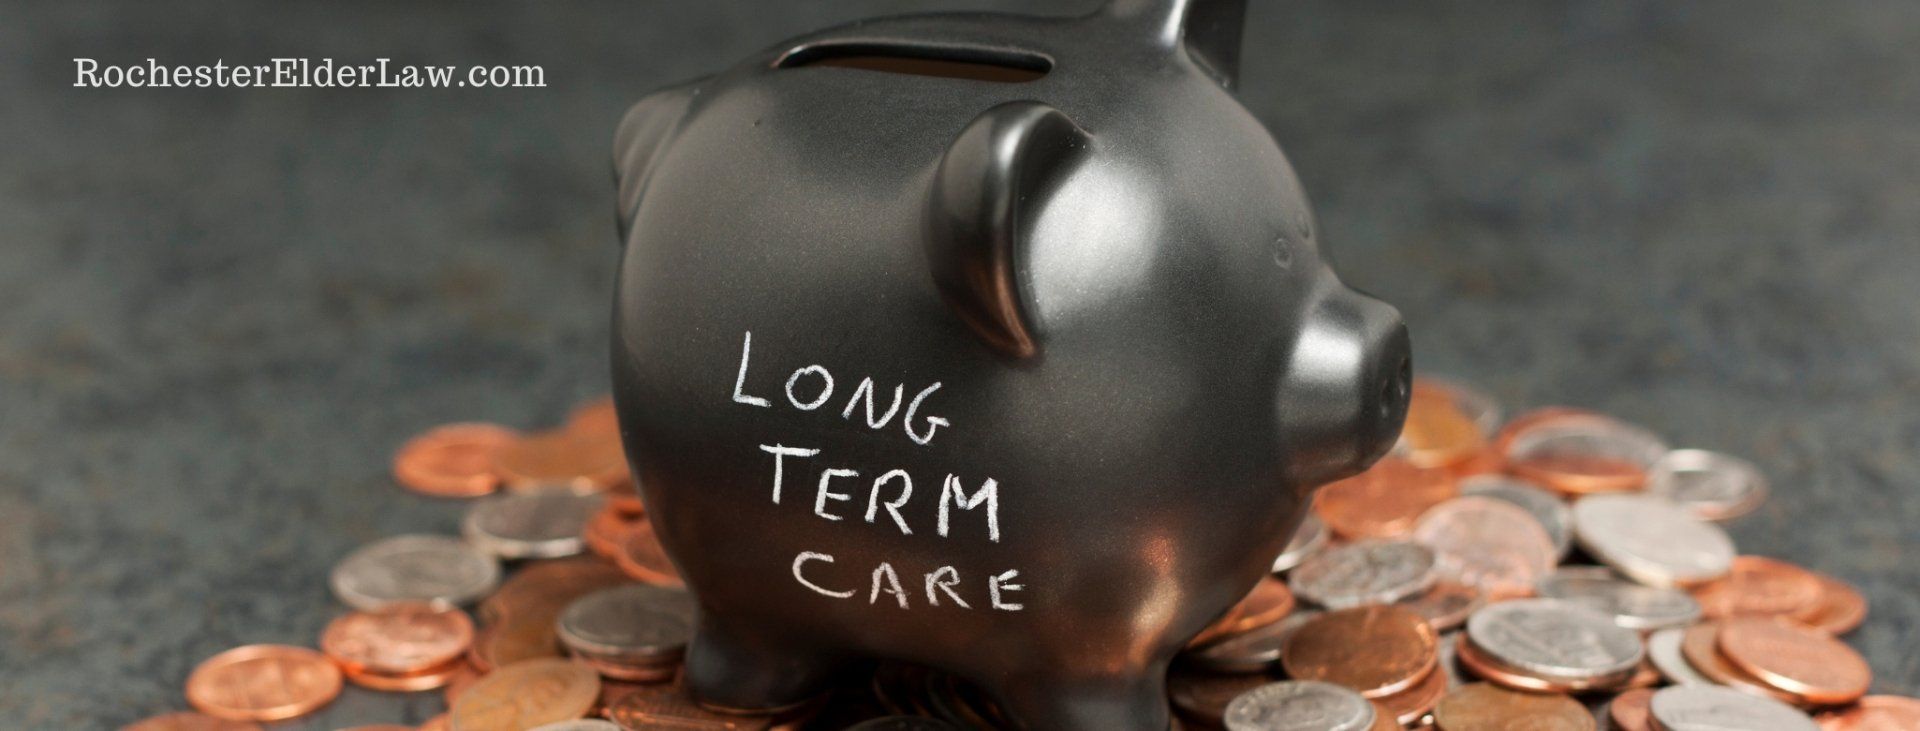 Affordable Long-Term Care in the US is an Urgent Priority